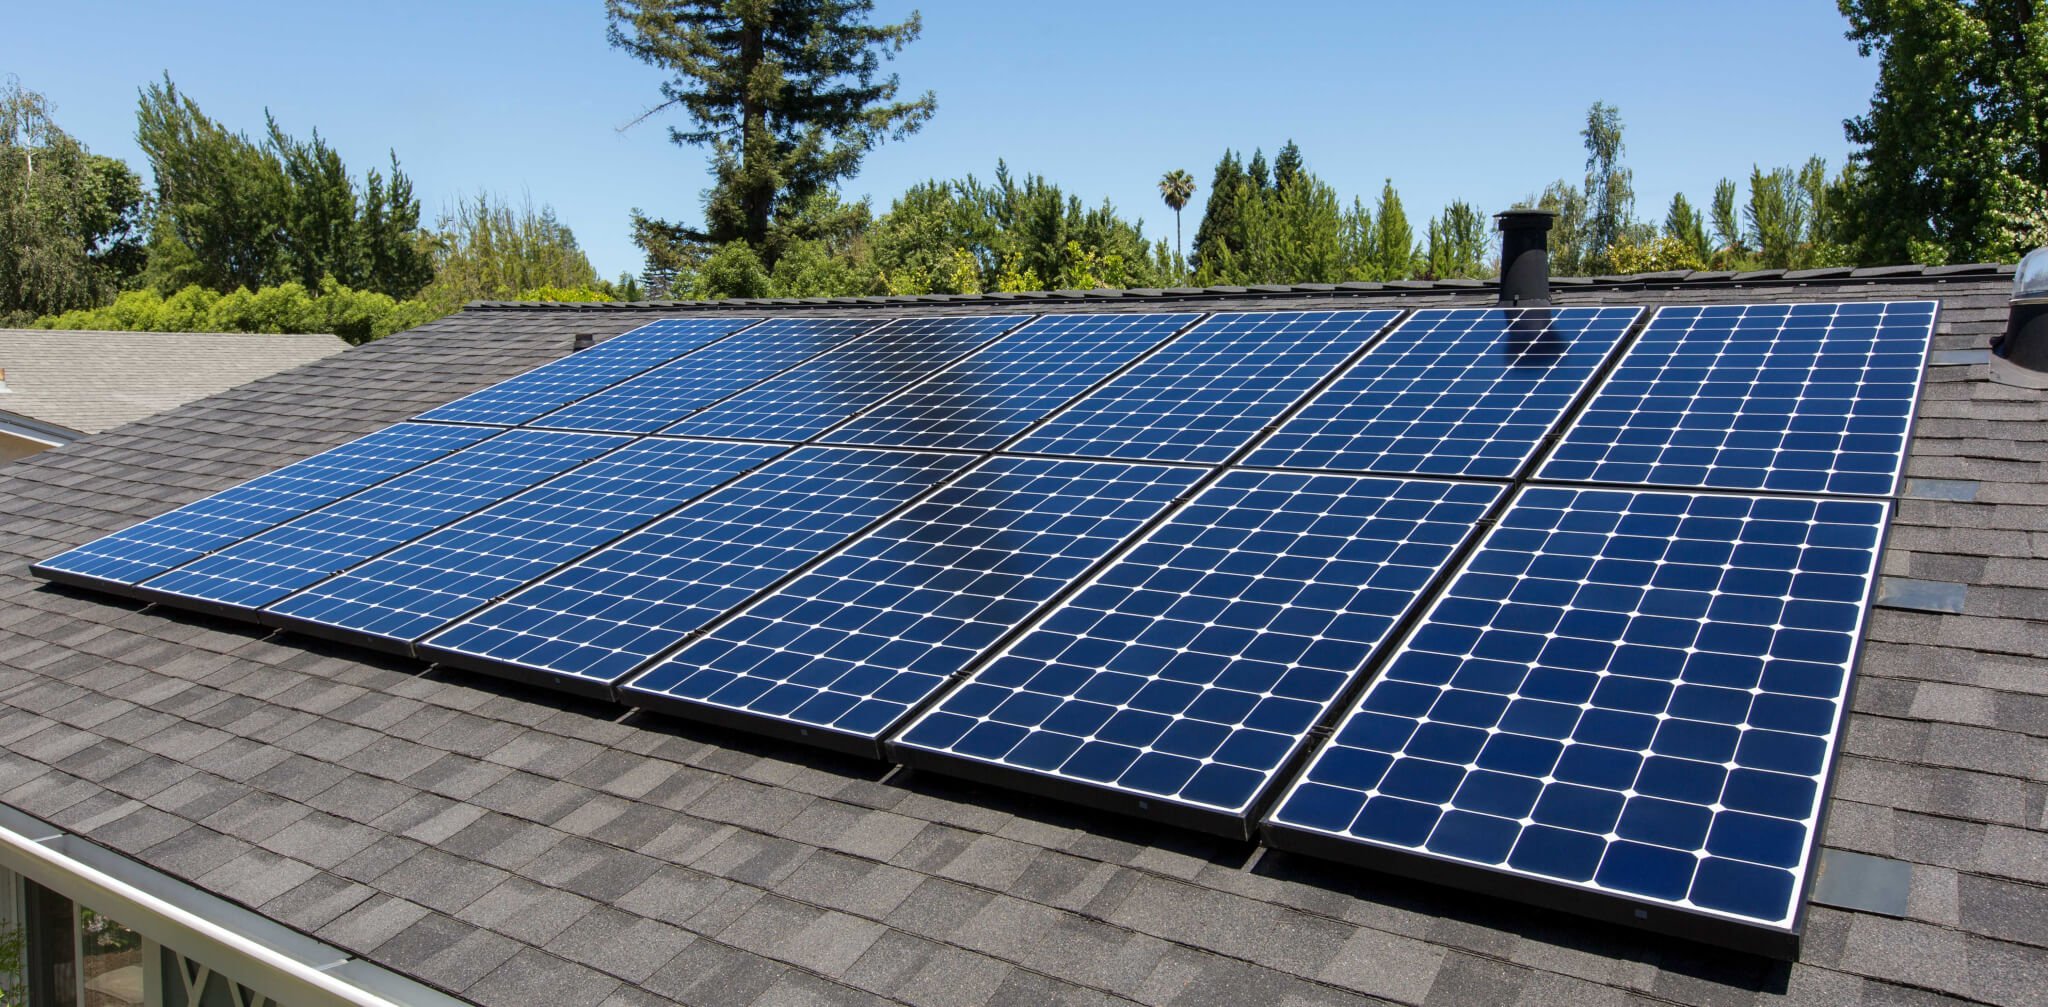 How Much Energy Does a Solar Panel Produce?